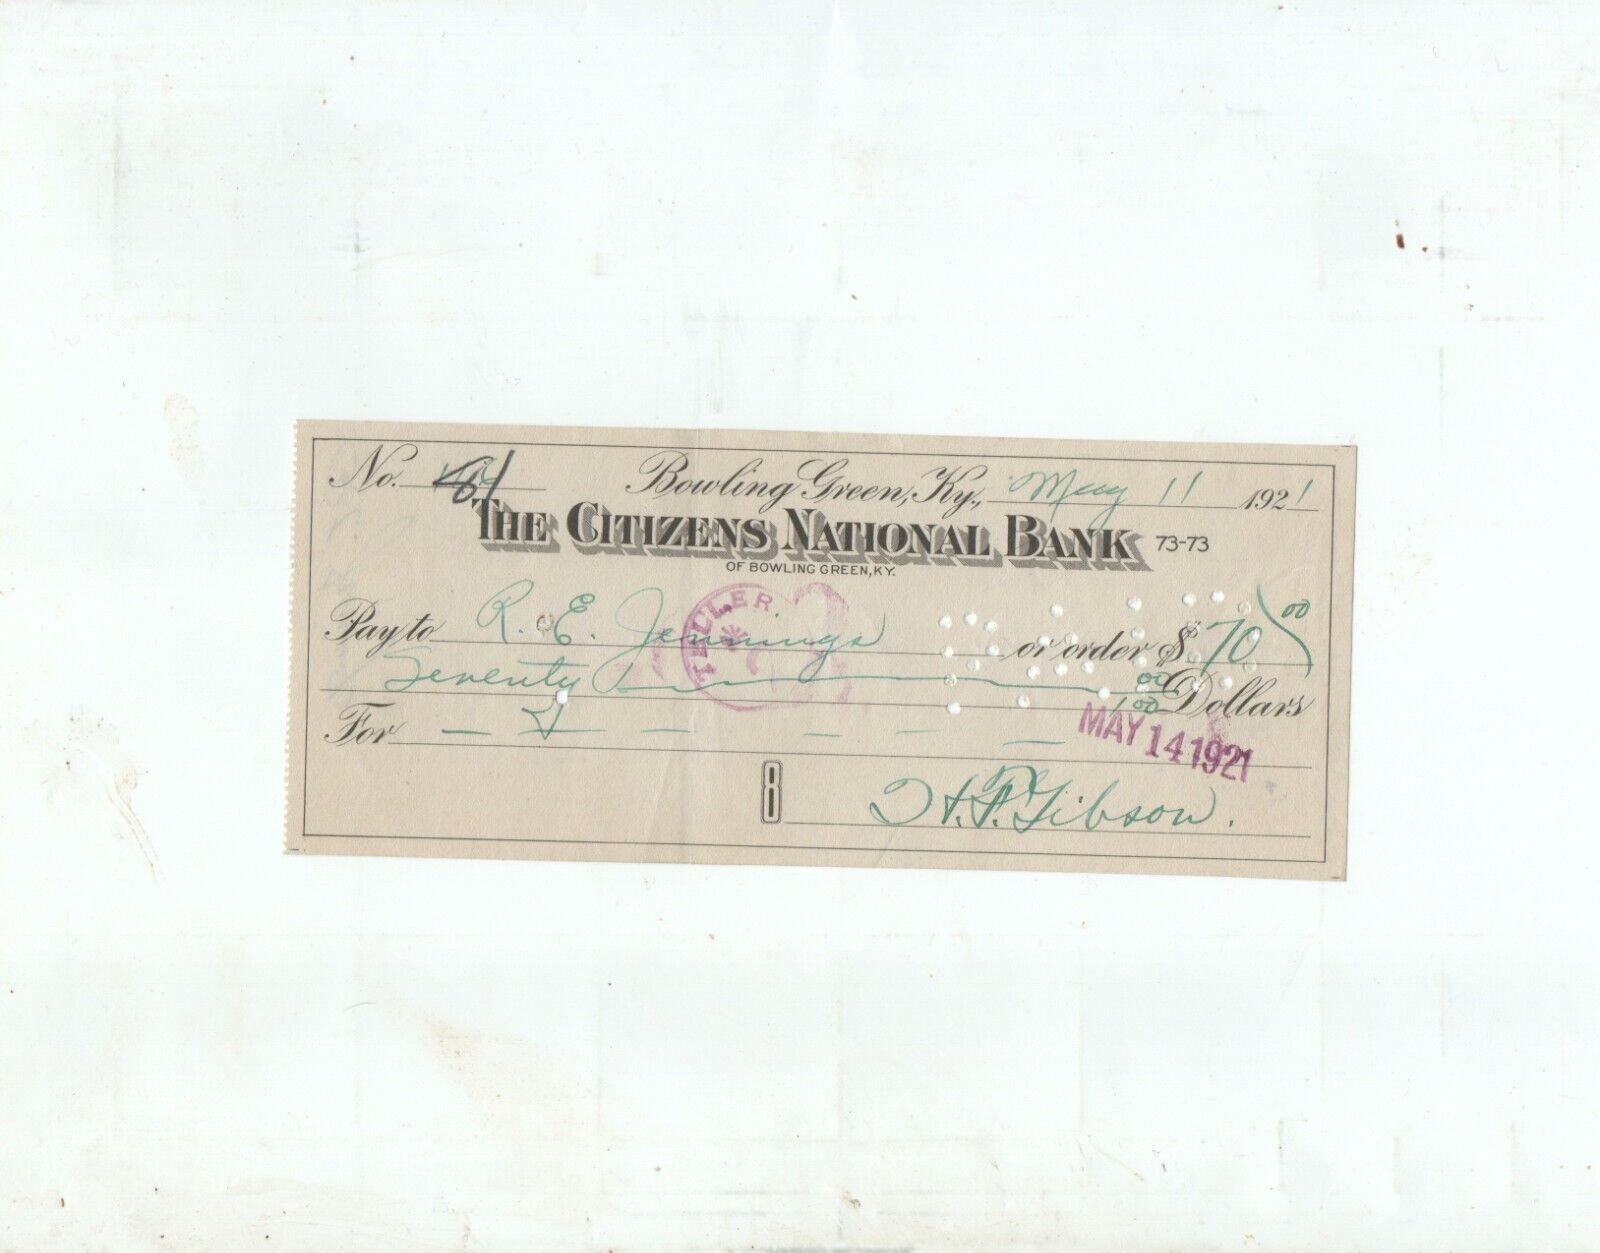 Bowling Green Kentucky 1921 bank check signed by R. E. Jennings and H. F. Gibson